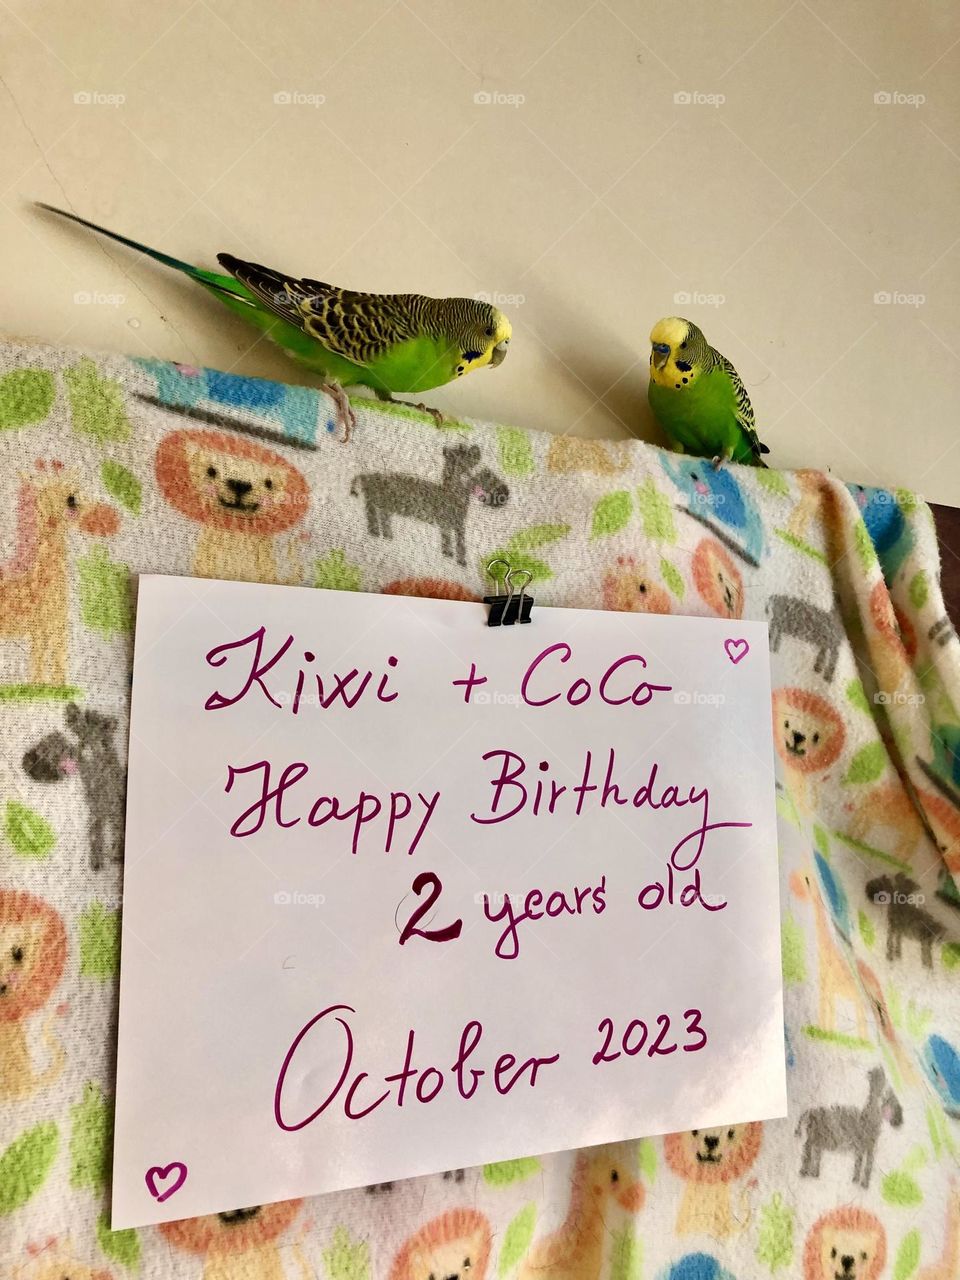 My pet birds Kiwi and Coco , with the Birthday poster🎂 🎉